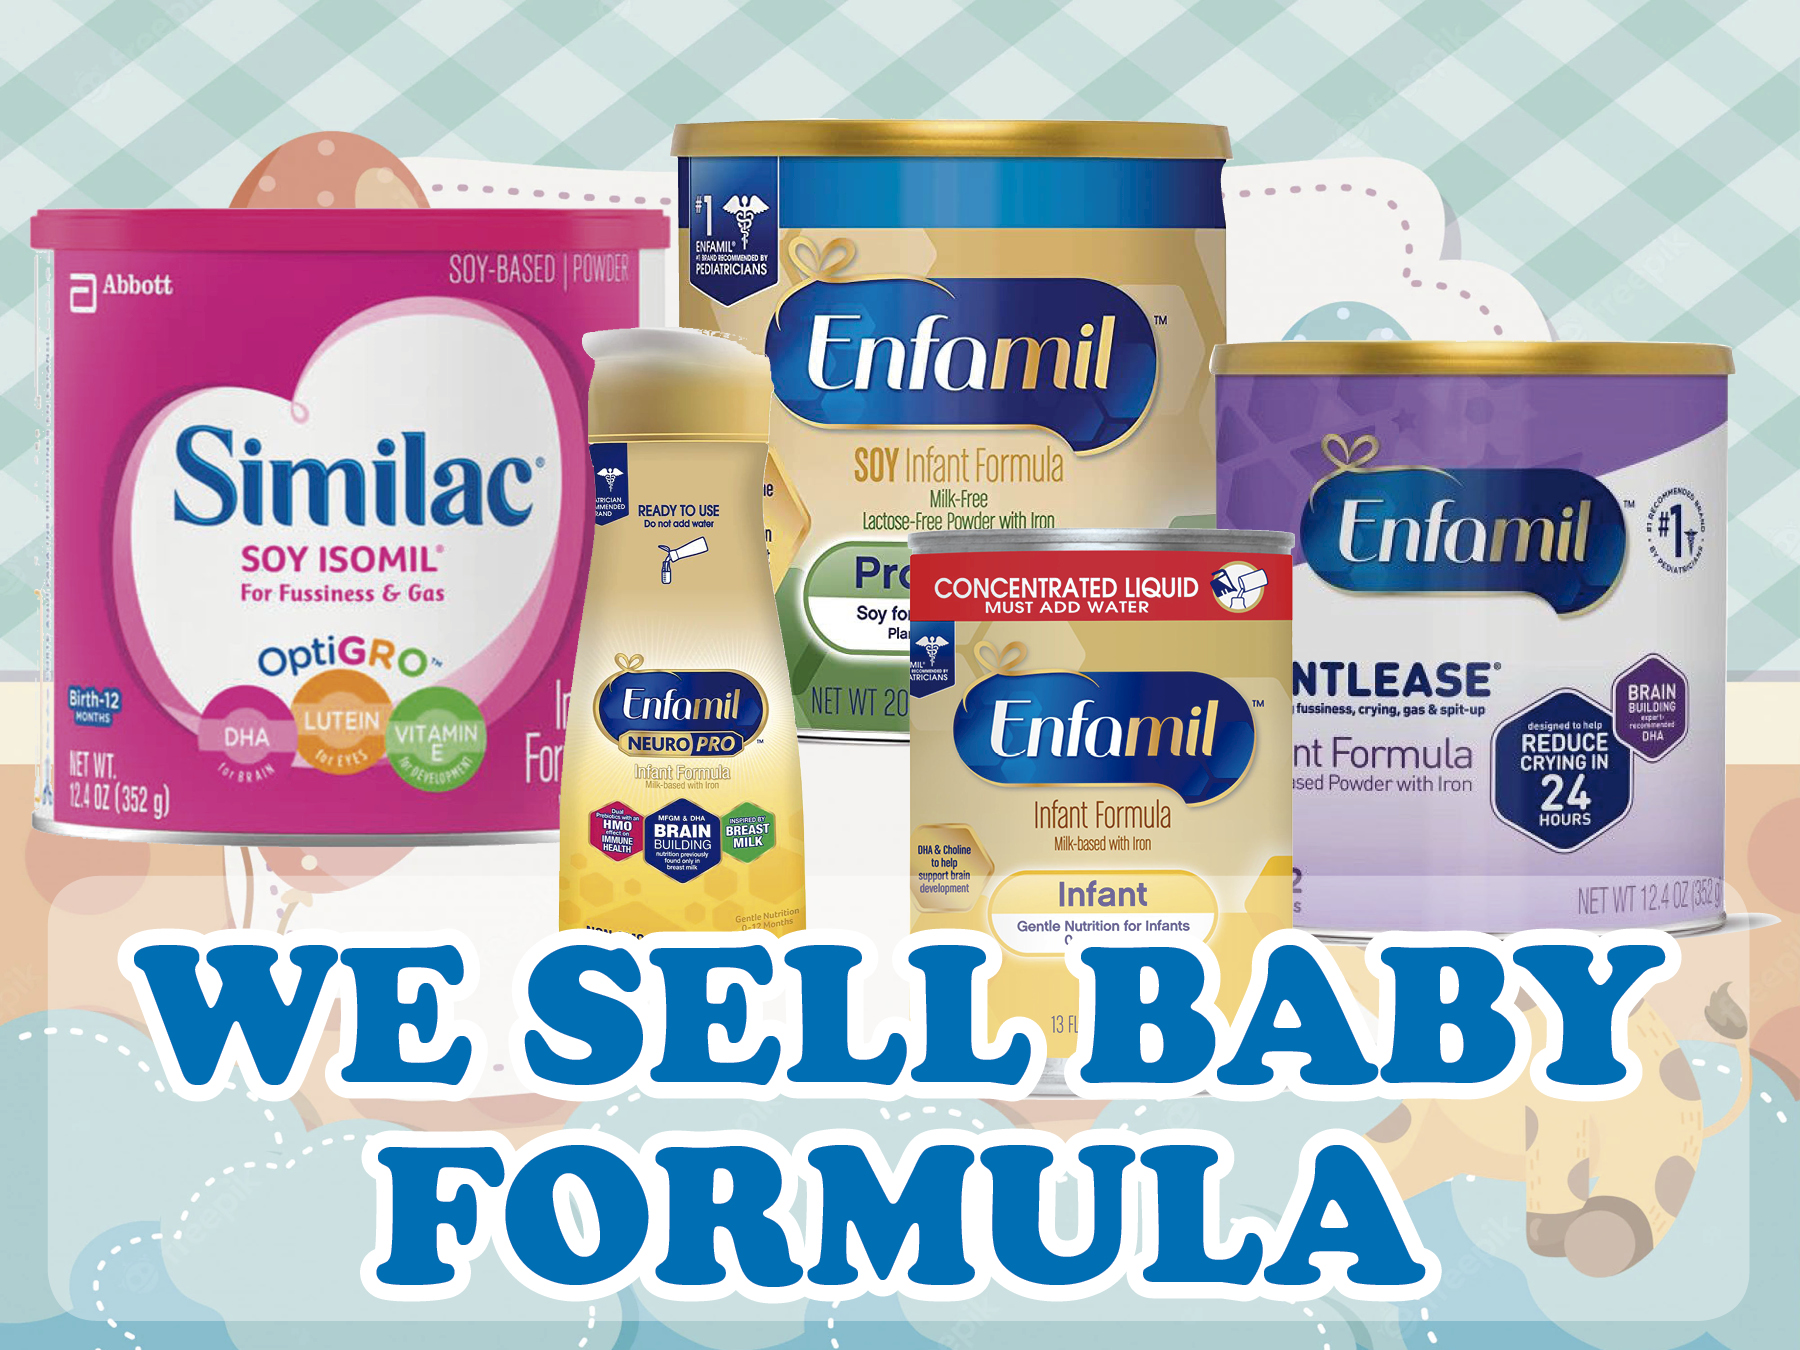 SOY-BASED | POWDER

 
       

Similac

For Fussiness &amp; Gas

OptiGR.

en [TST

UST ADD WATER

_ NTLEASE'

1 Wssiness, crying, 9as § spit-up (mts ¥

nt Formula (EERE

ised Powder with Iron 24 I
mm

ror

        

   

 
  

~

Infant

Gonde Nurtion for Infants

WE SELL BABY.
FORMULA